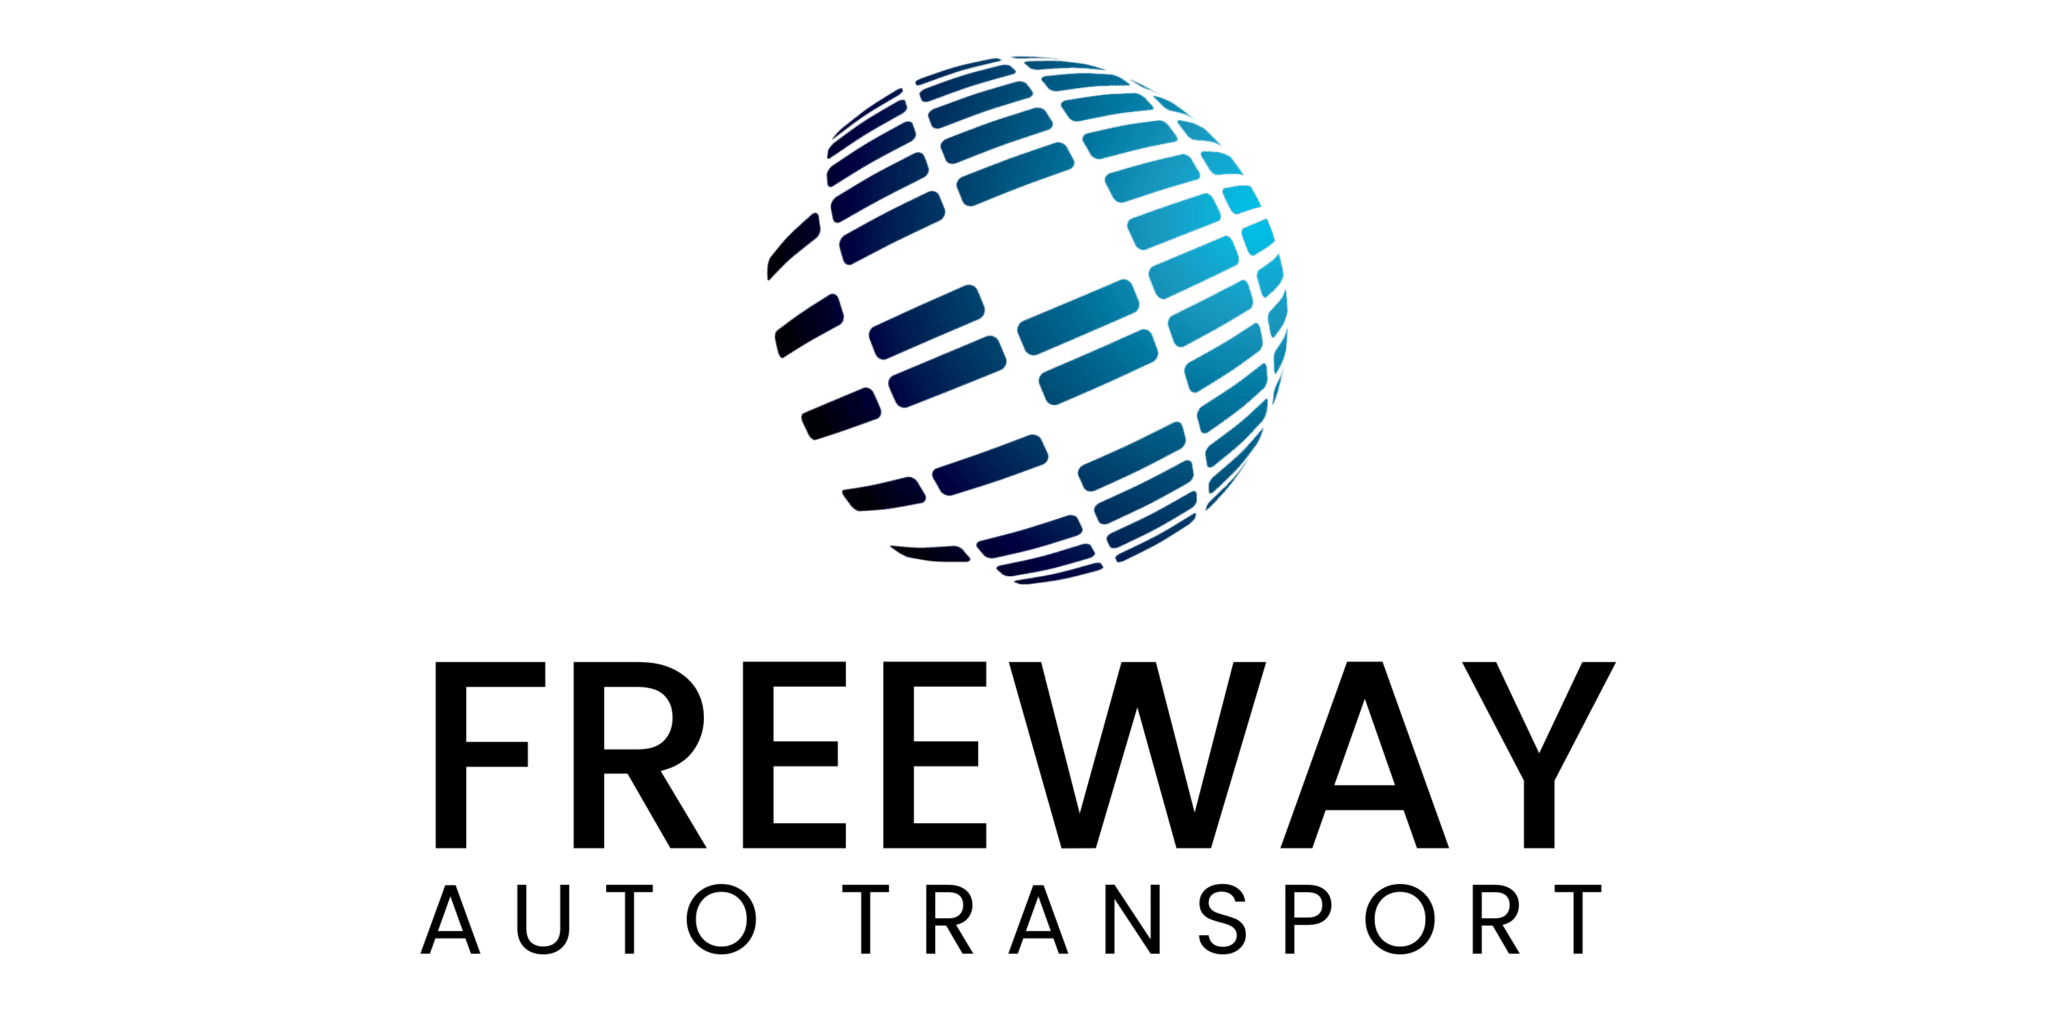 freeway-logo-center-with-no-background-black text